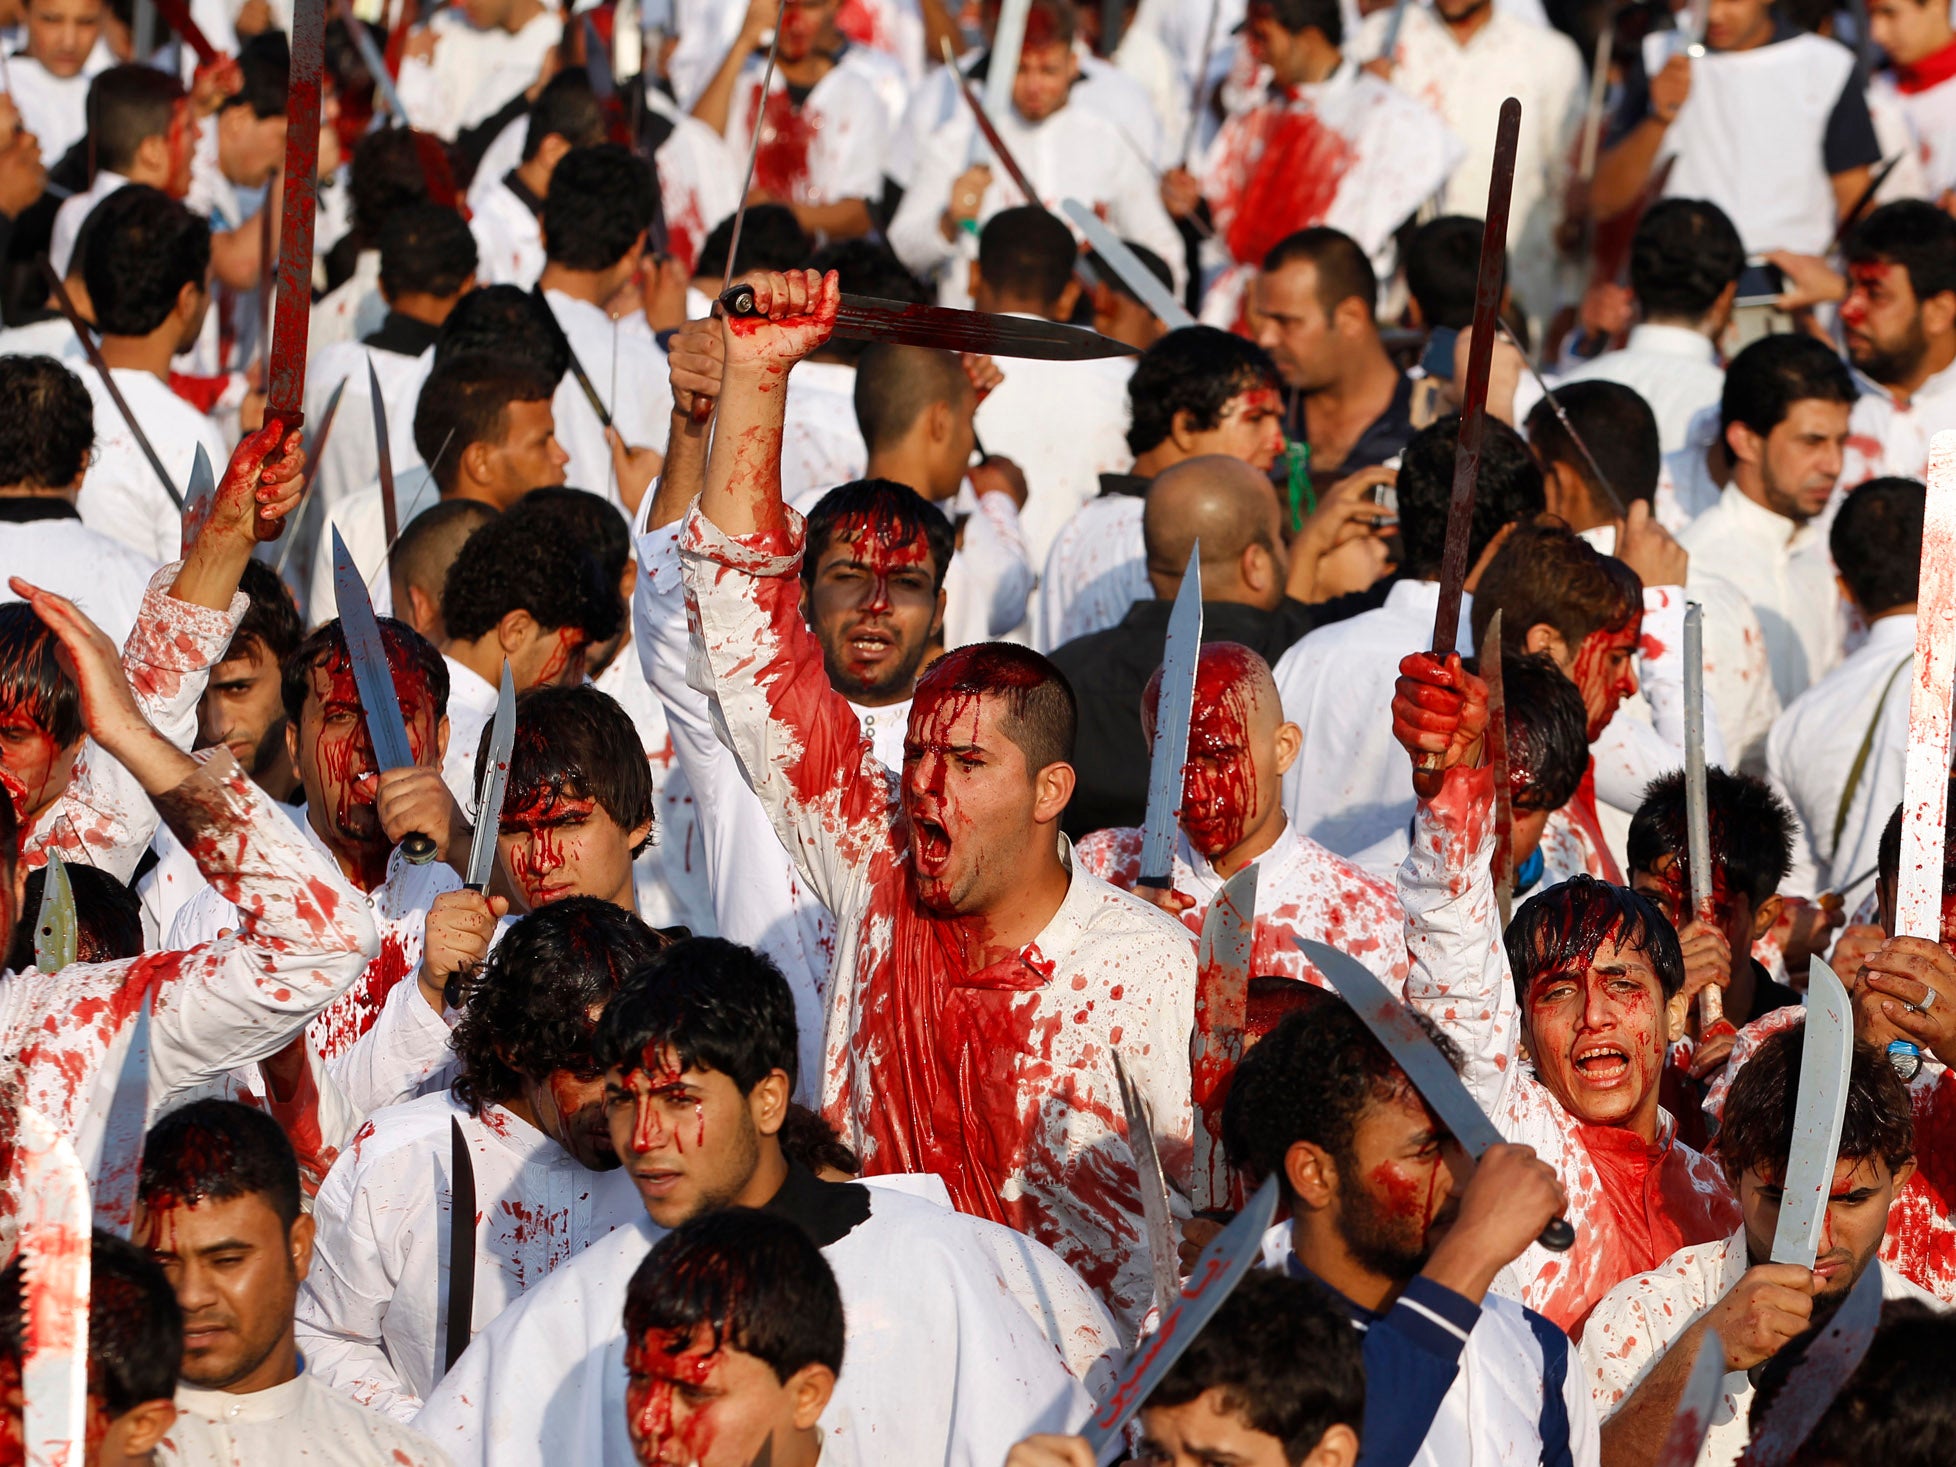 Iraqi Shi’ite Muslims bleed after hitting their foreheads with swords and beating themselves during the religious festival of Ashura in Baghdad